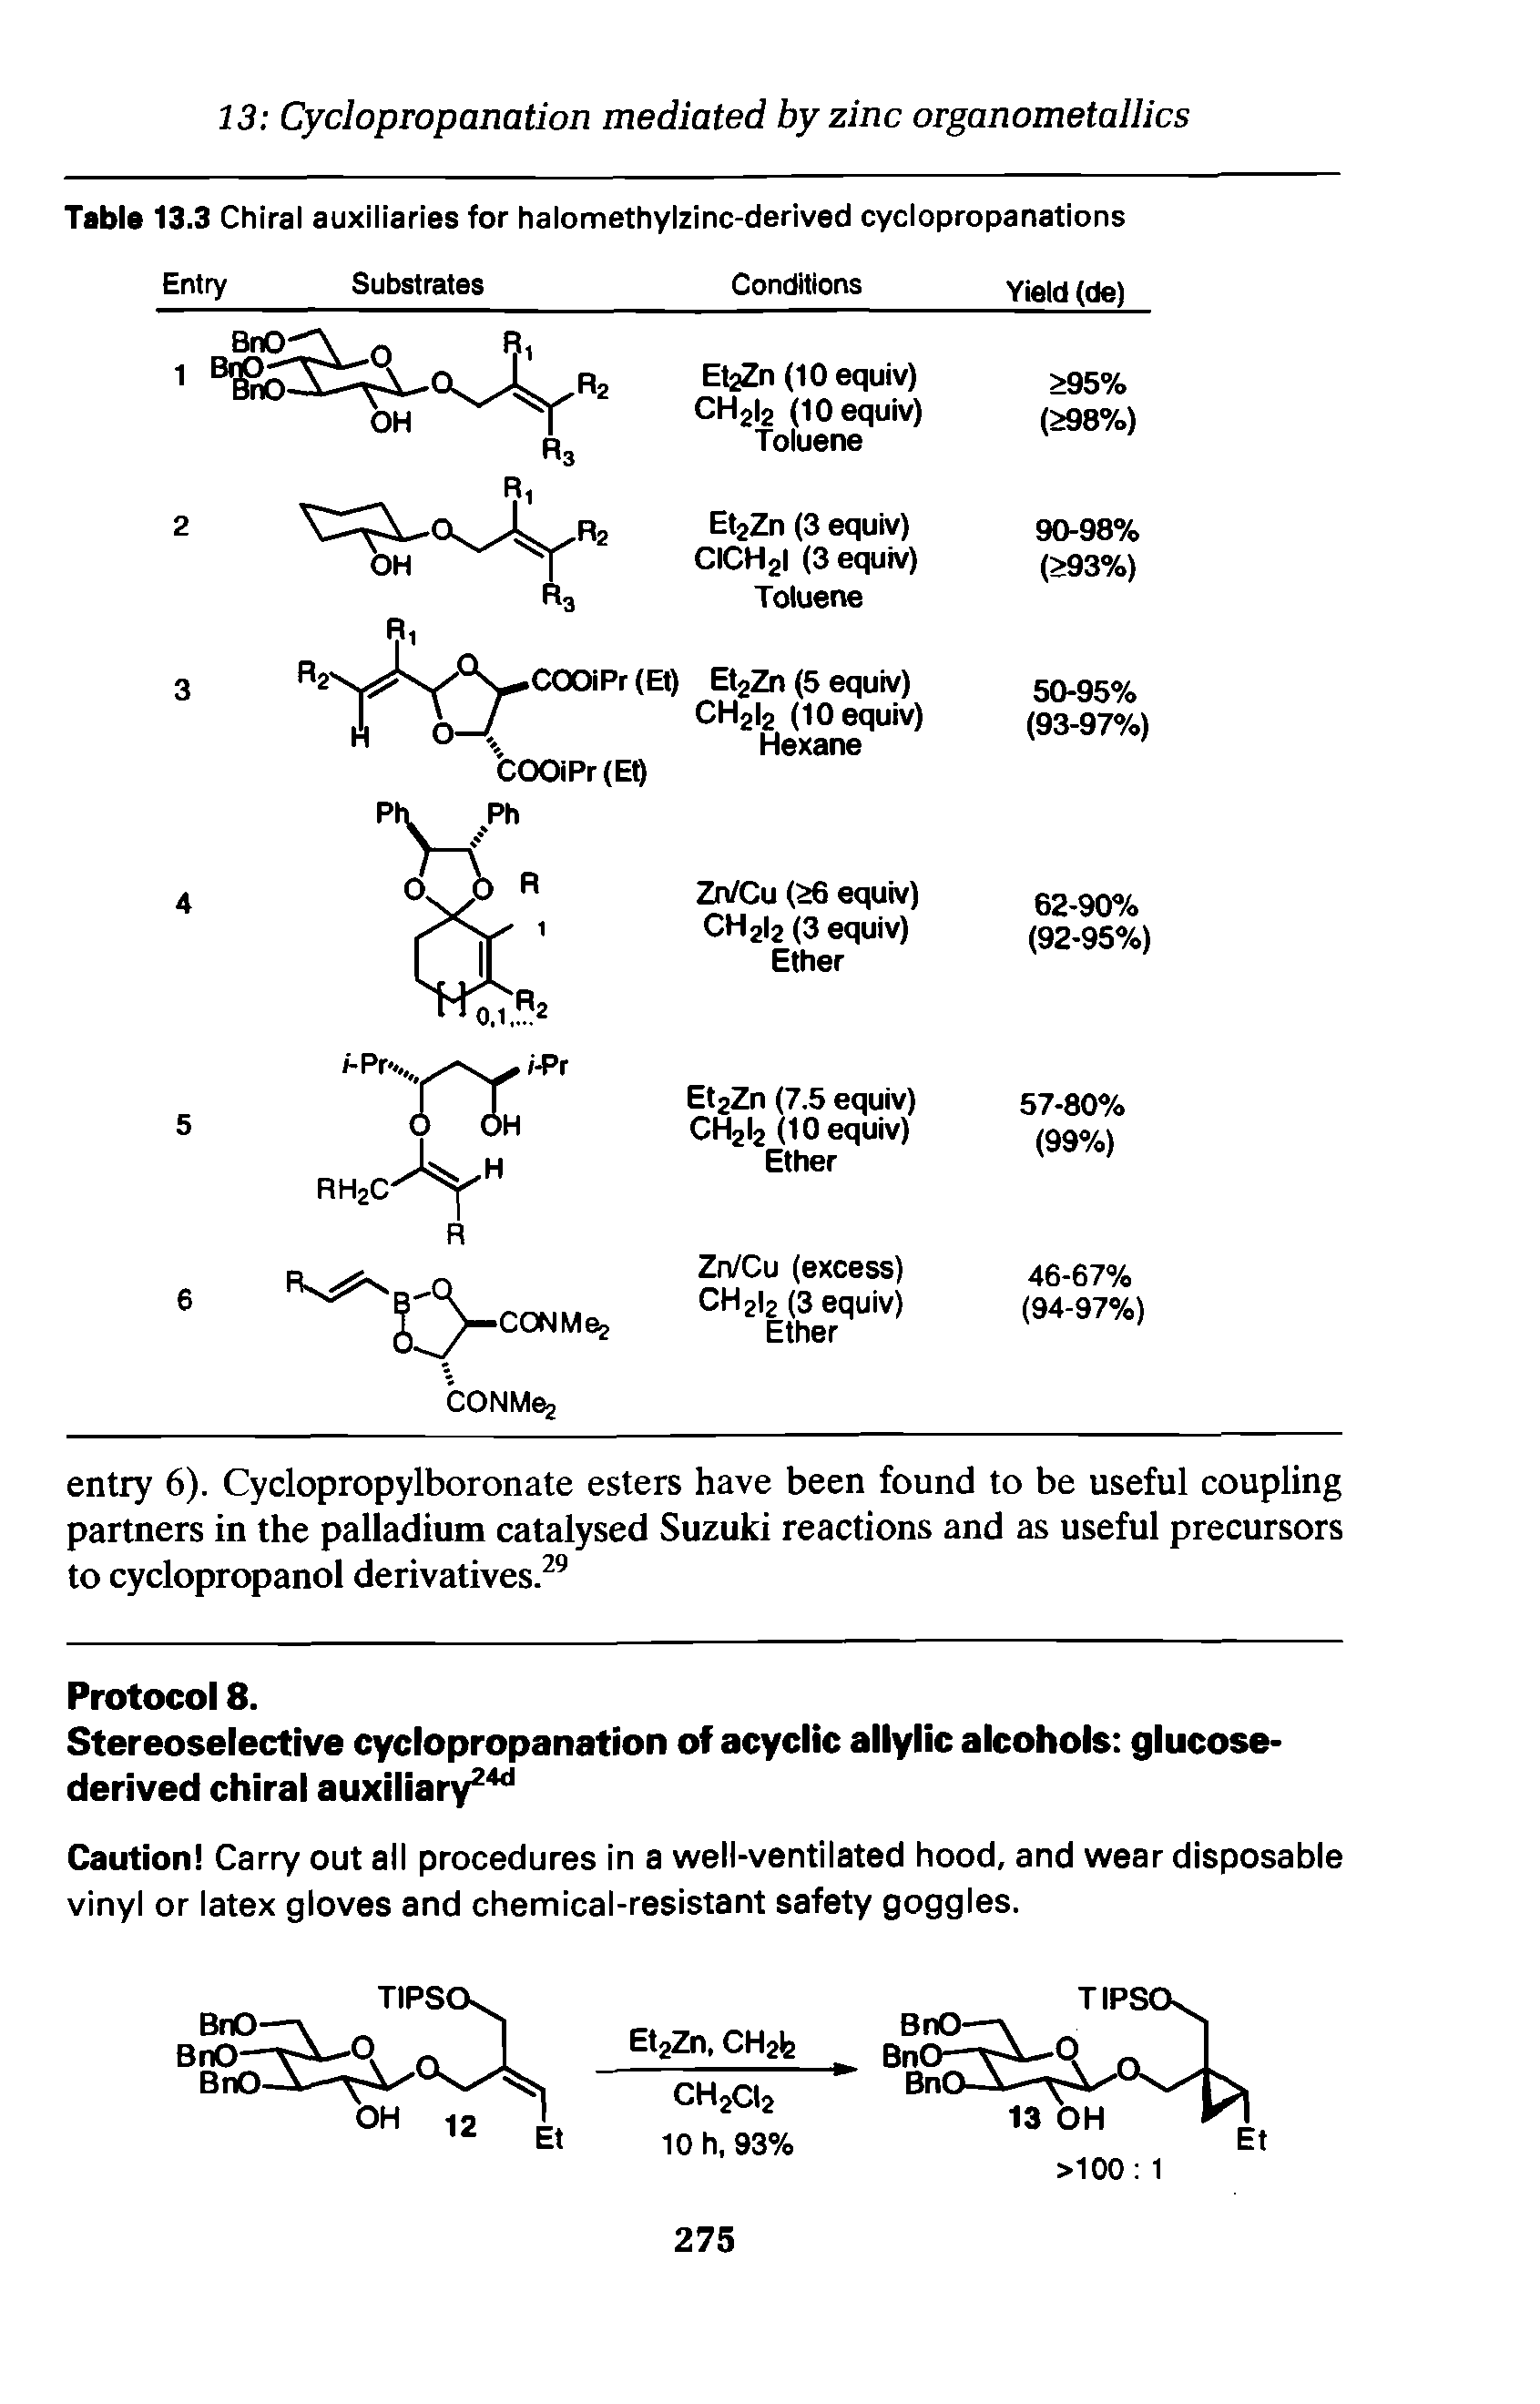 Table 13.3 Chiral auxiliaries for halomethylzinc-derived cyclopropanations...